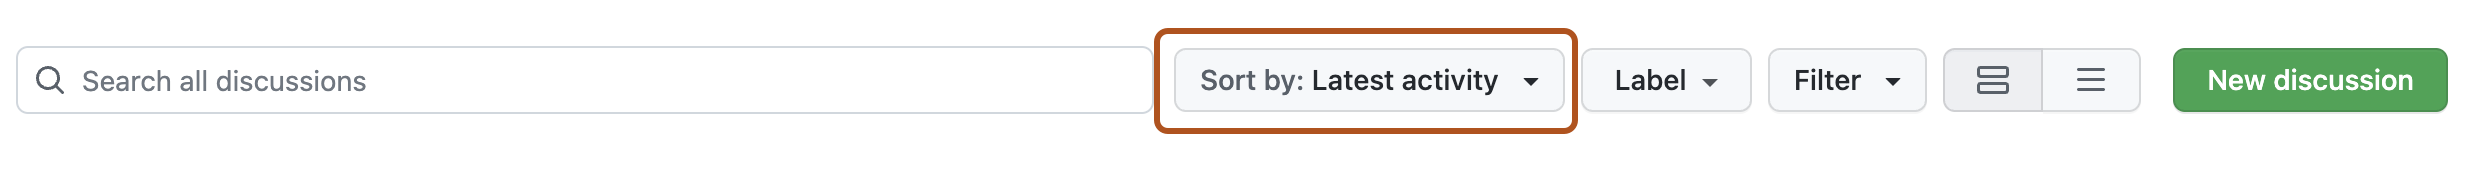 Buttons for sorting discussions